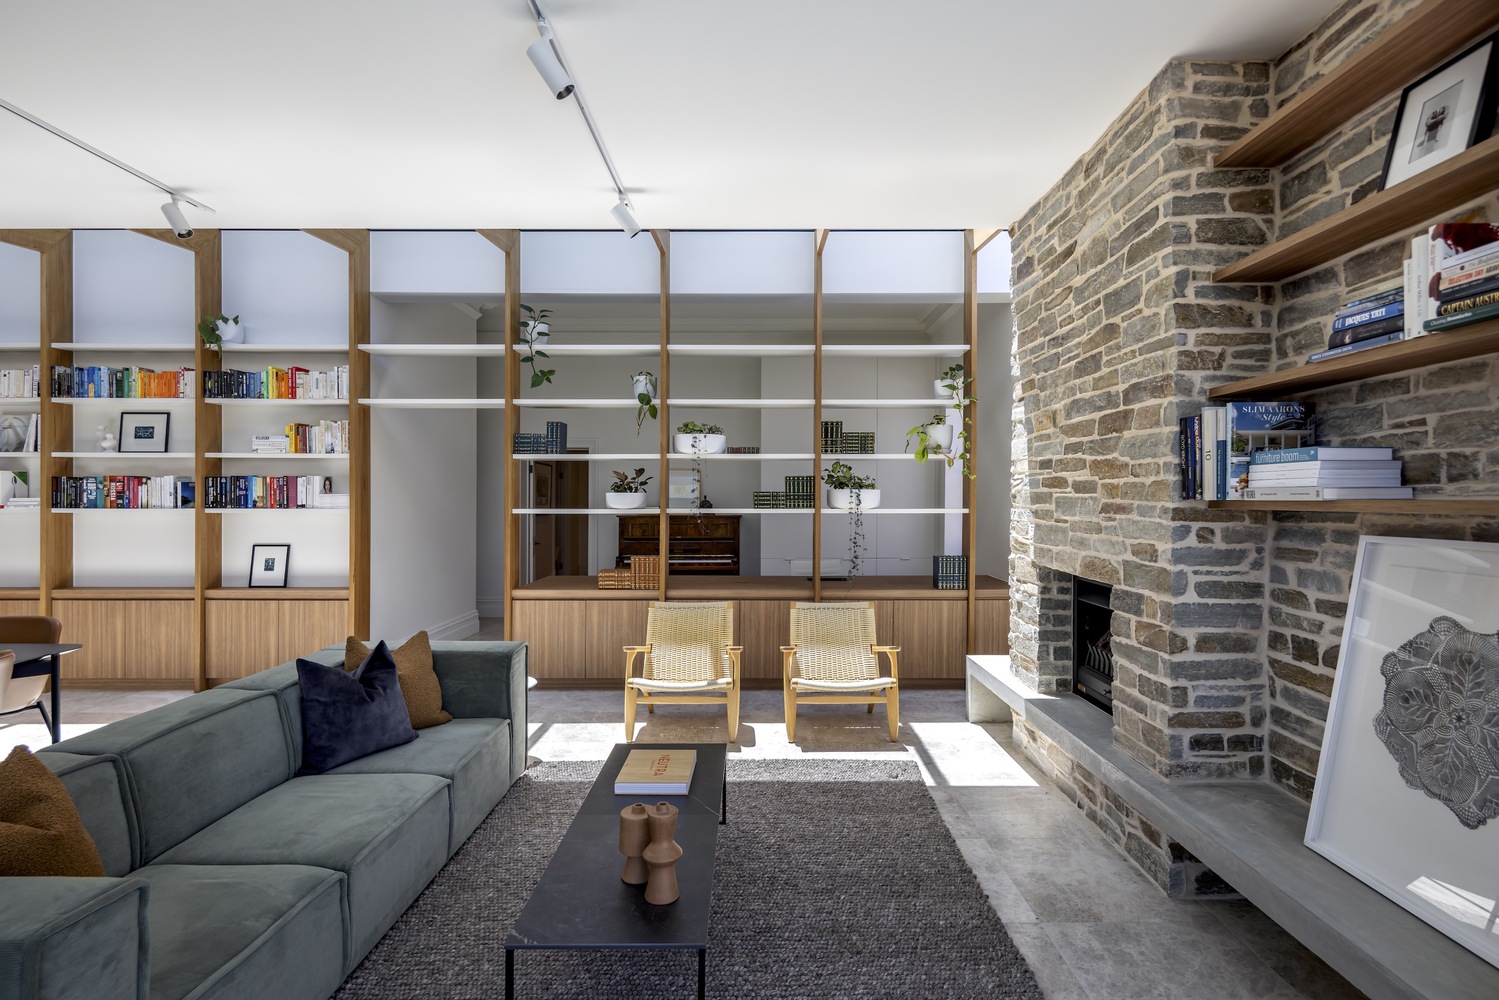 The communal area with its brick fireplace. Photo by Art Department Creative.